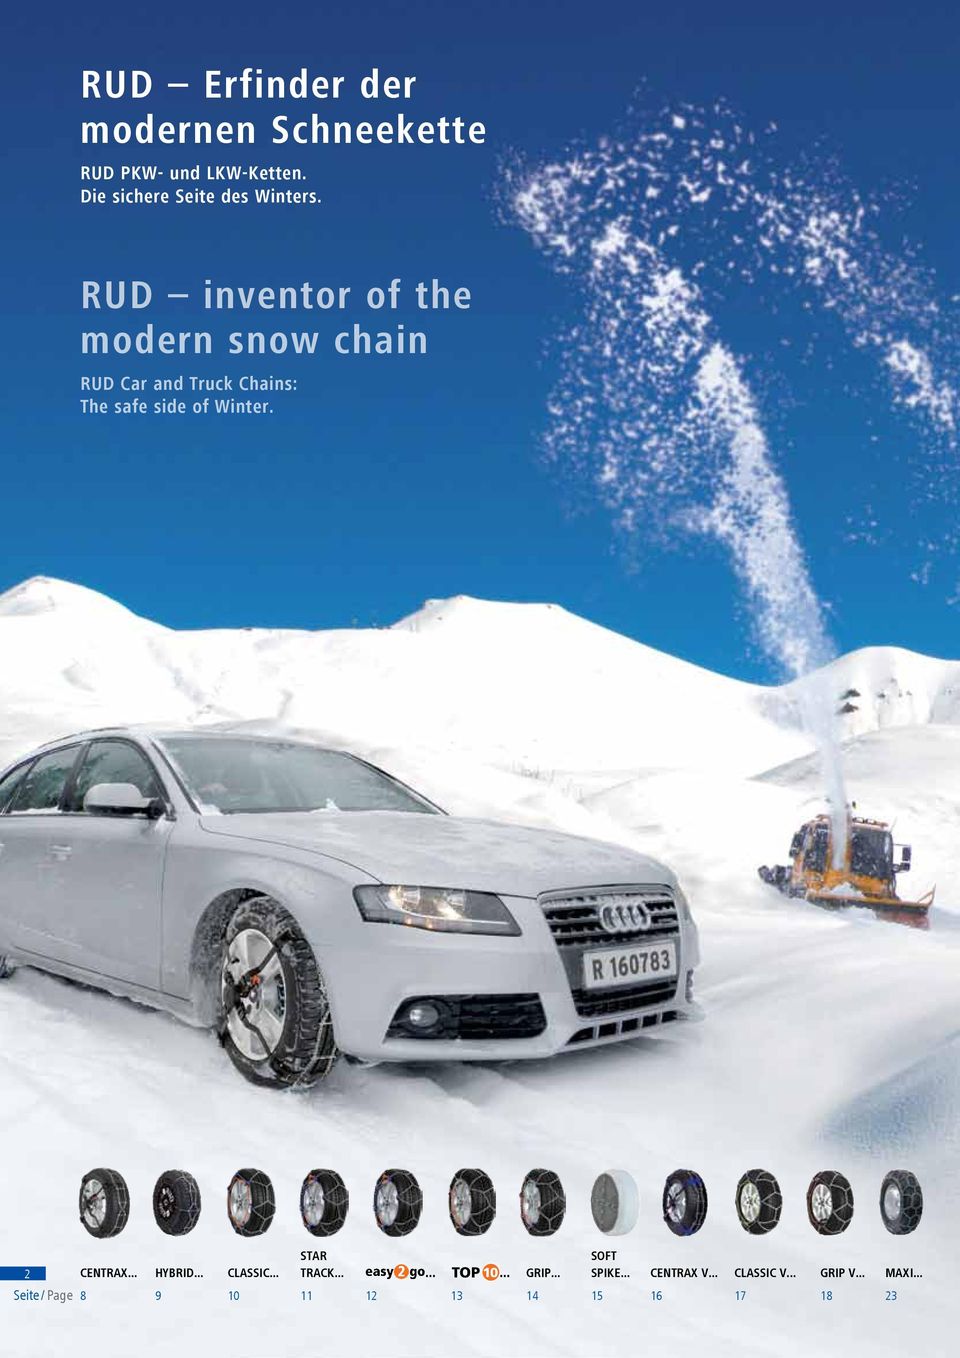 RUD inventor of the modern snow chain RUD Car and Truck Chains: The safe side of Winter.